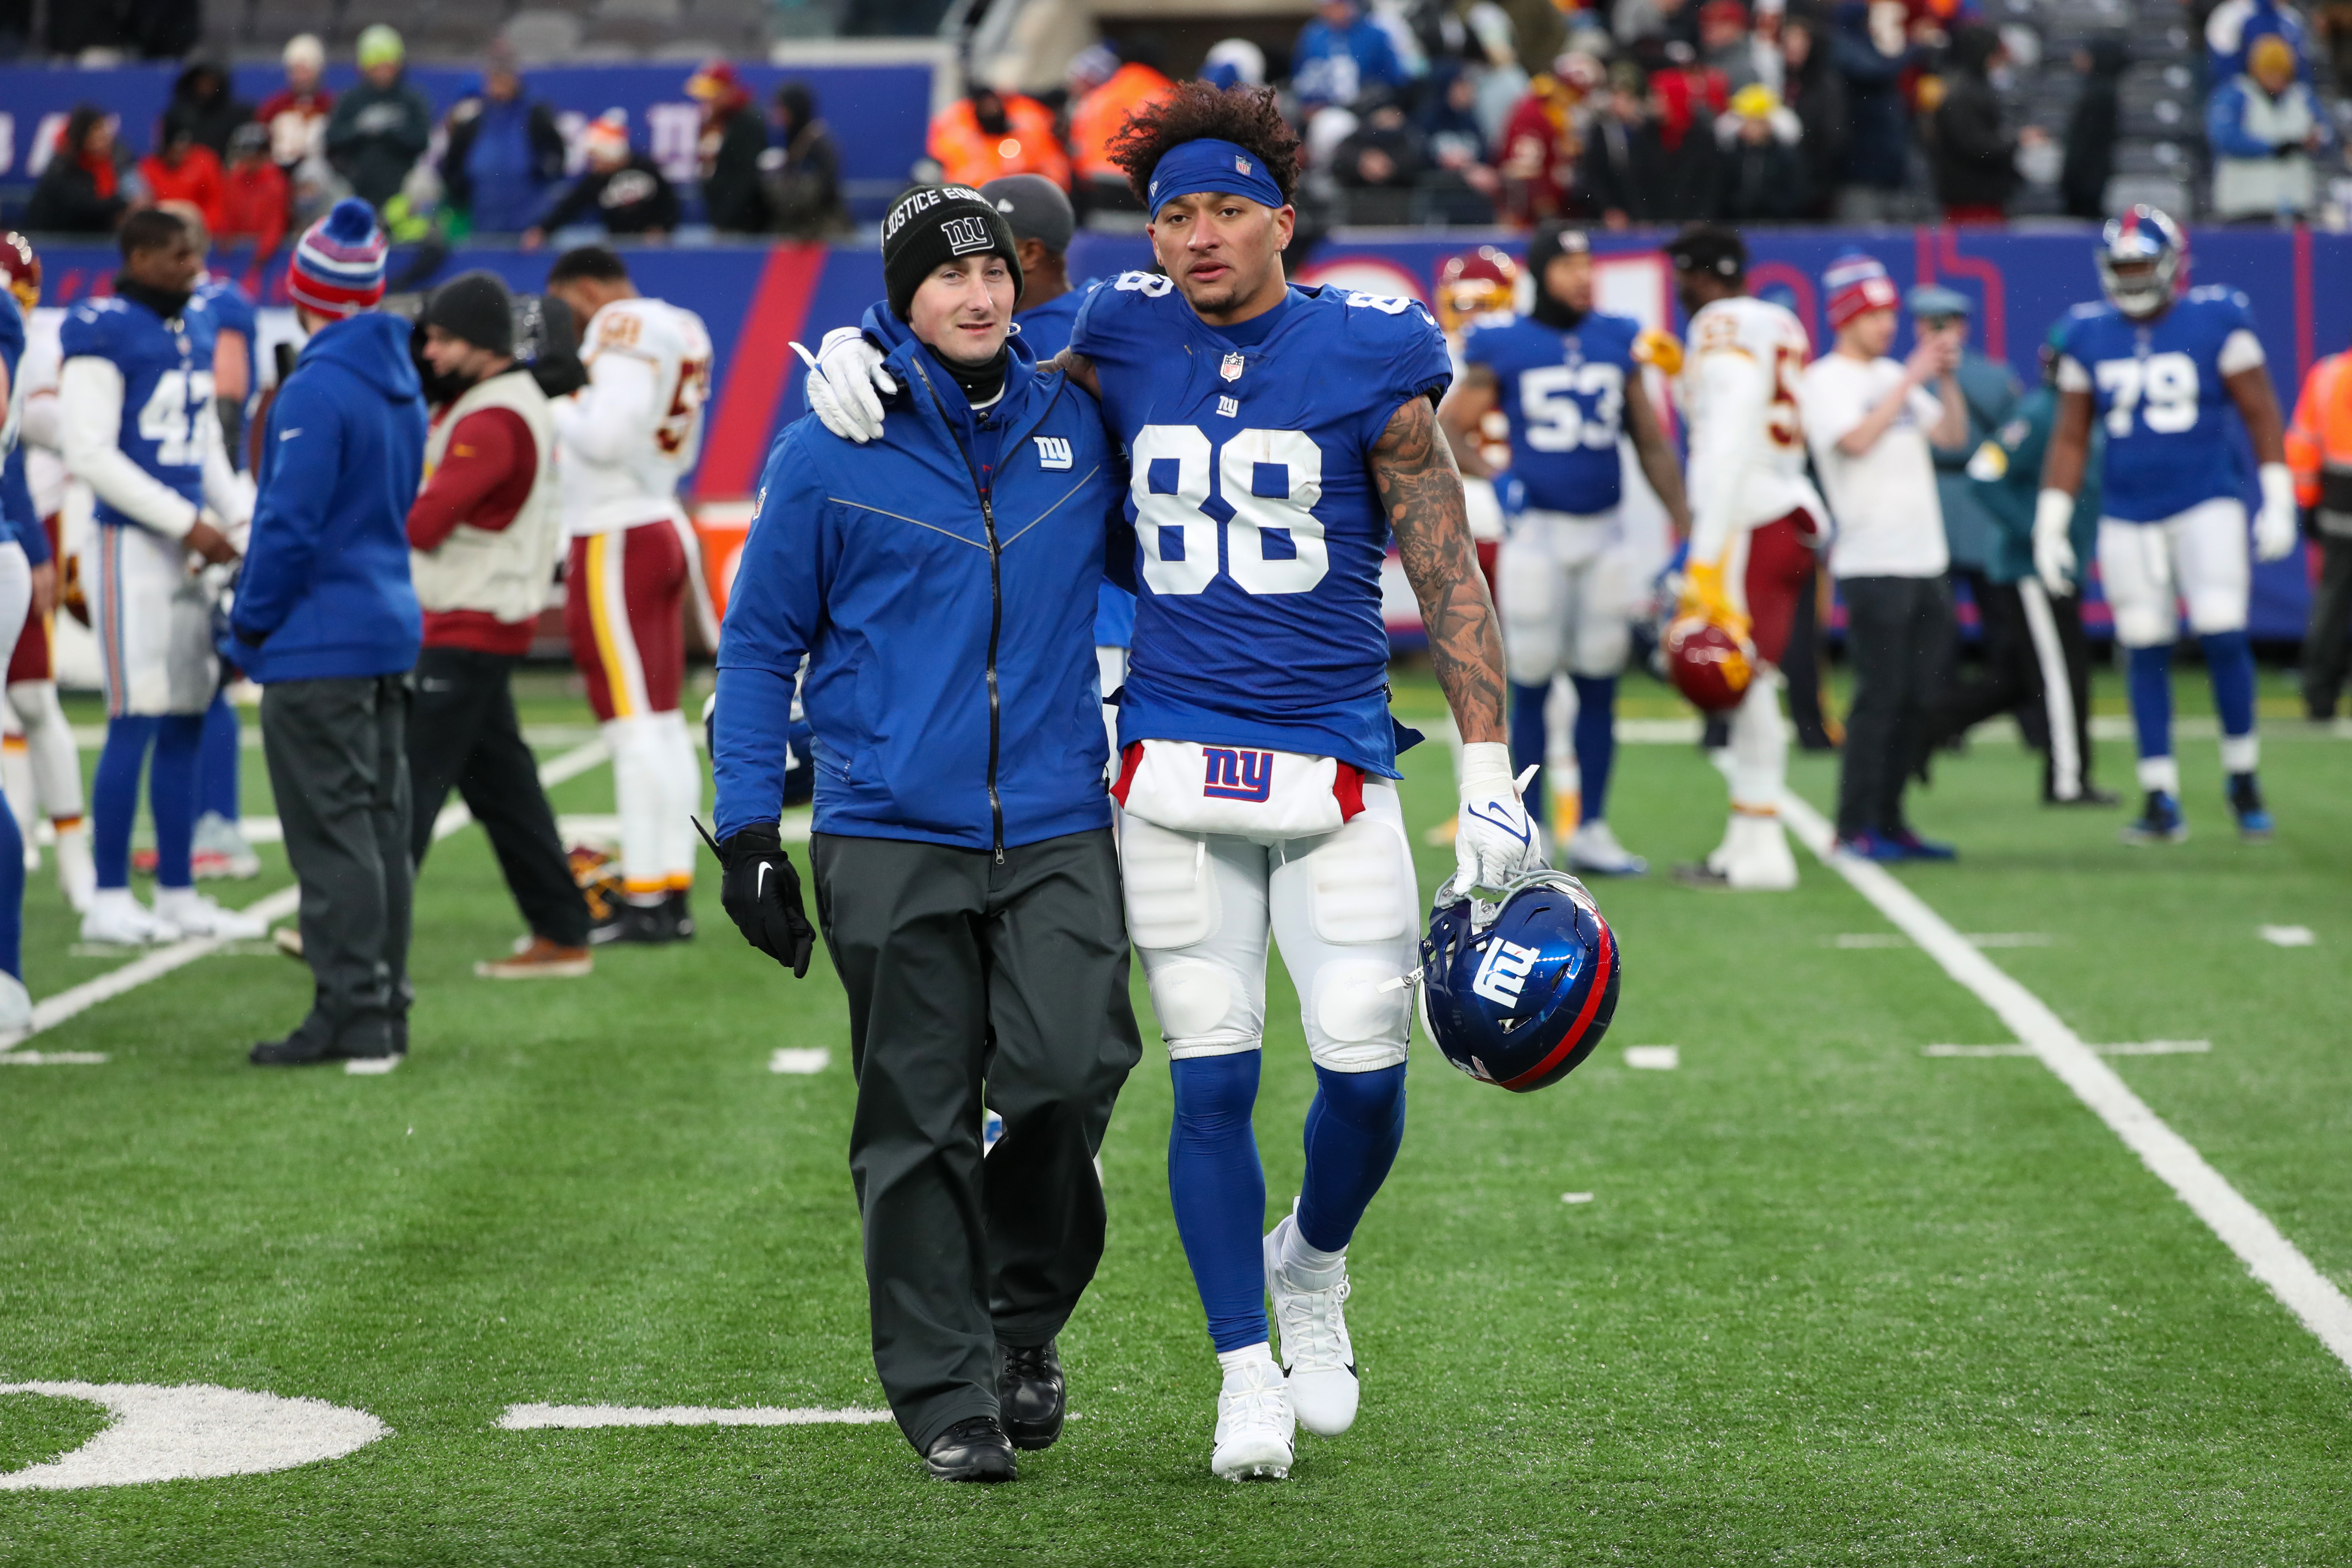 New York Giants assistant coach Derek Dooley and tight end Evan Engram (88) walk off after the Giants lost to the Washington Football Team, 22-7, on Sunday, Jan. 9, 2022 in East Rutherford, N.J.